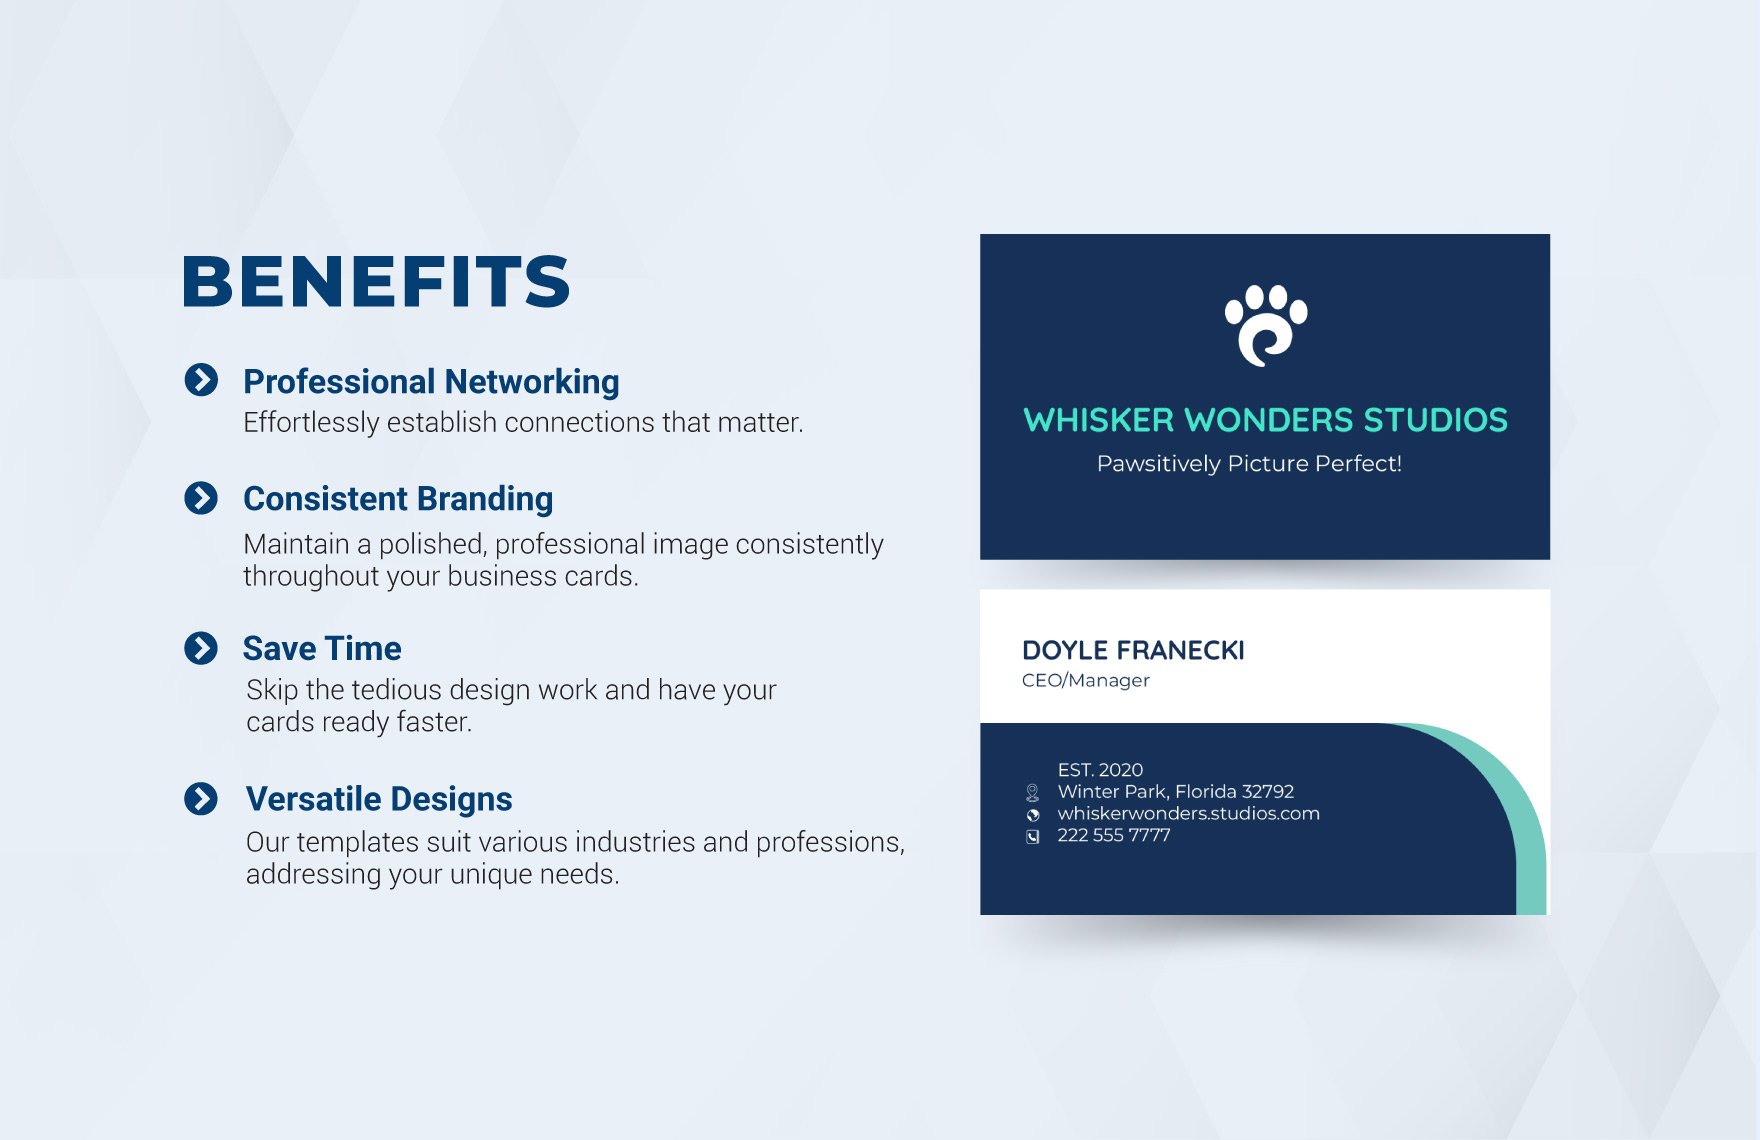 Business Card Layout Template